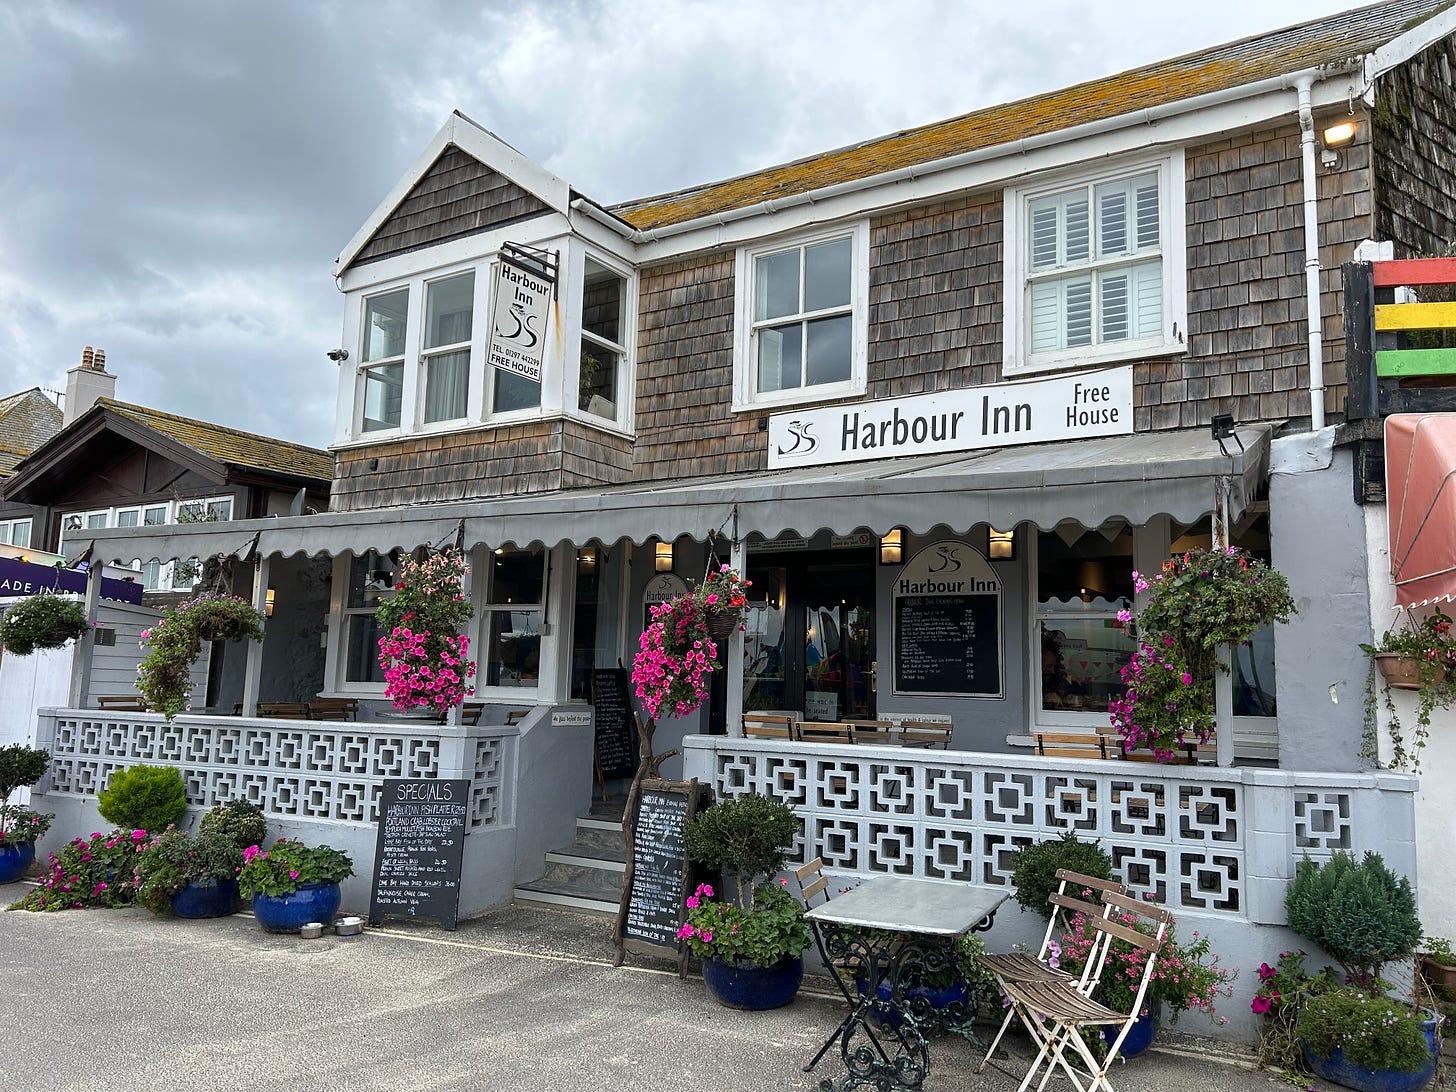 Harbour Inn, Marine Parade, Lyme Regis. There is an outside veranda for those days to sit out and enjoy food or a drink. The veranda is adorned with hanging baskets and pots of flowers are in front of the inn along with two menu boards. Image: Rolands' Travels